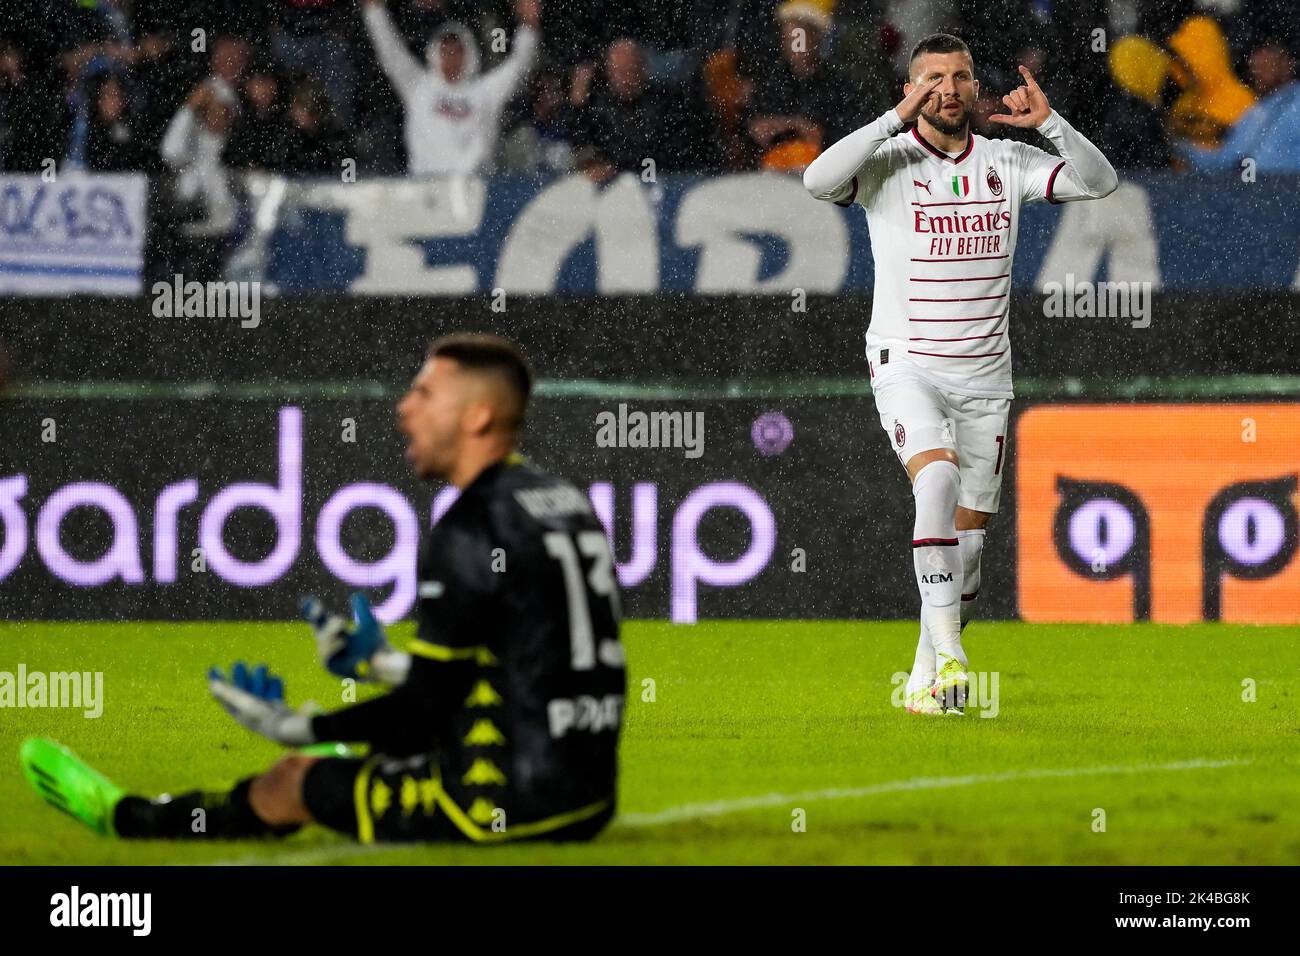 Empoli, Italy. 01st Oct, 2022. Ante Rebic of AC Milan celebrates after scoring the goal of 0-1 during the Serie A football match between Empoli FC and AC Milan at Carlo Castellani stadium in Empoli (Italy), October 1st, 2022. Photo Paolo Nucci/Insidefoto Credit: Insidefoto di andrea staccioli/Alamy Live News Stock Photo